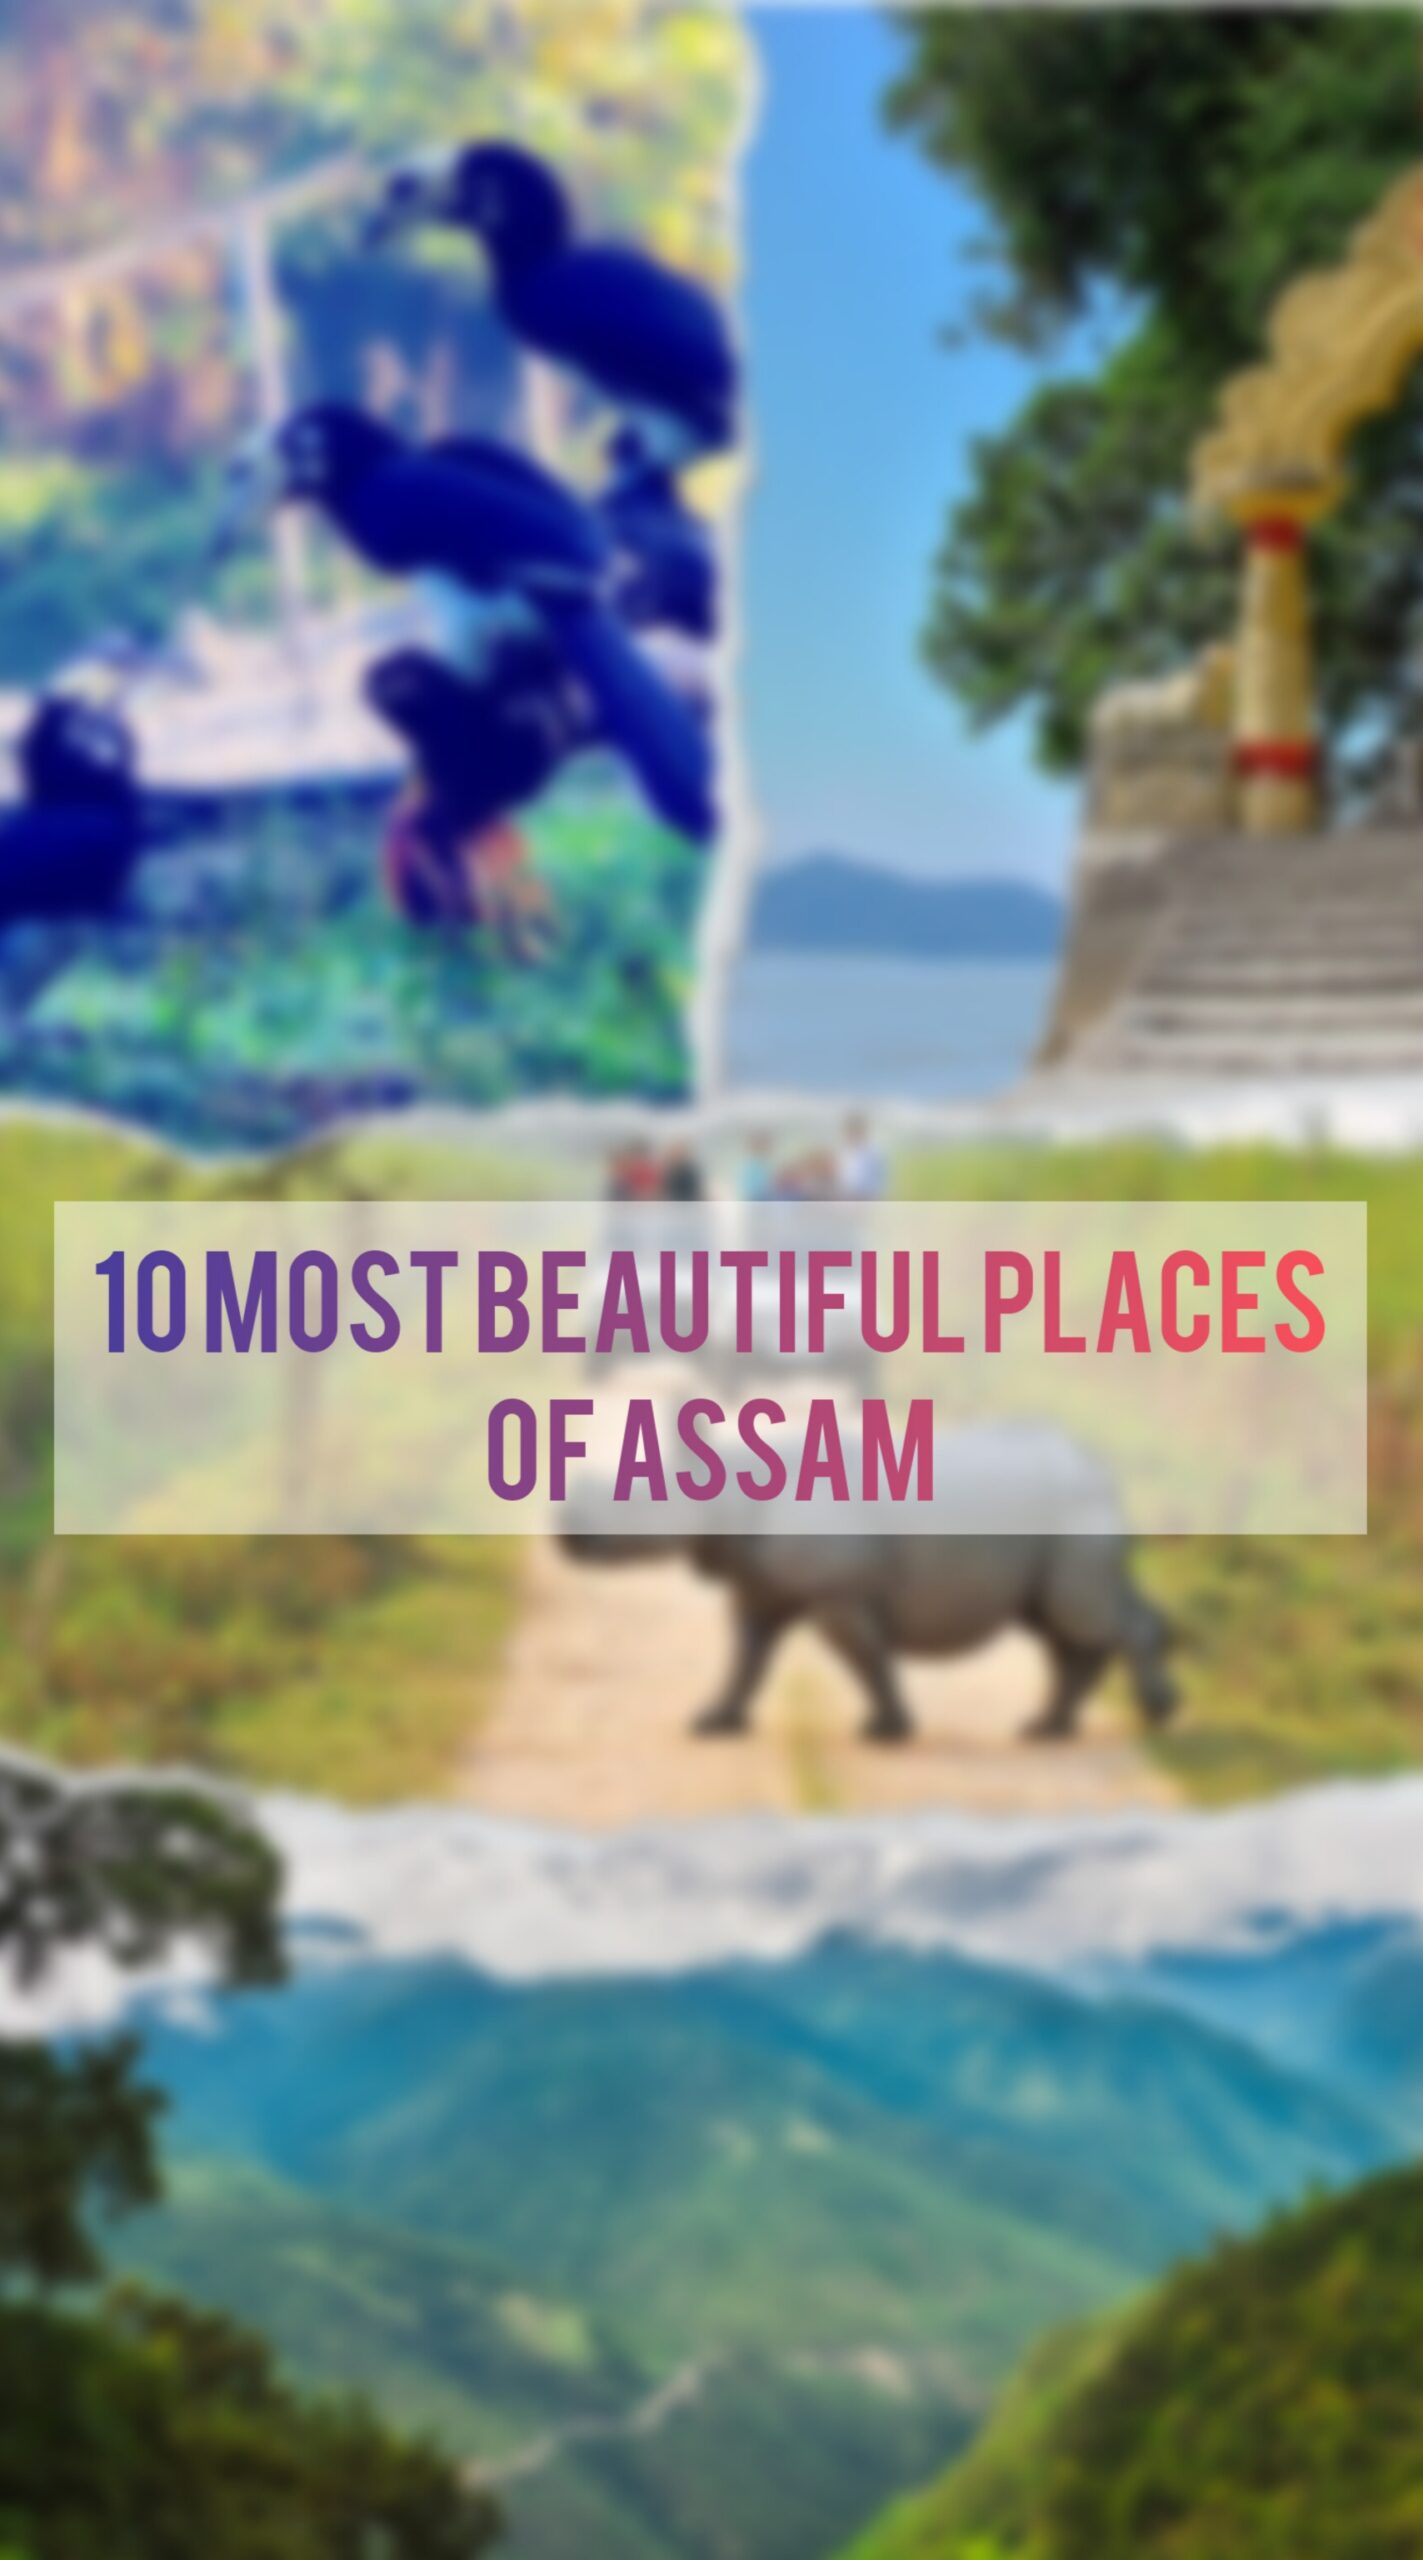 10 Most Beautiful Places of Assam